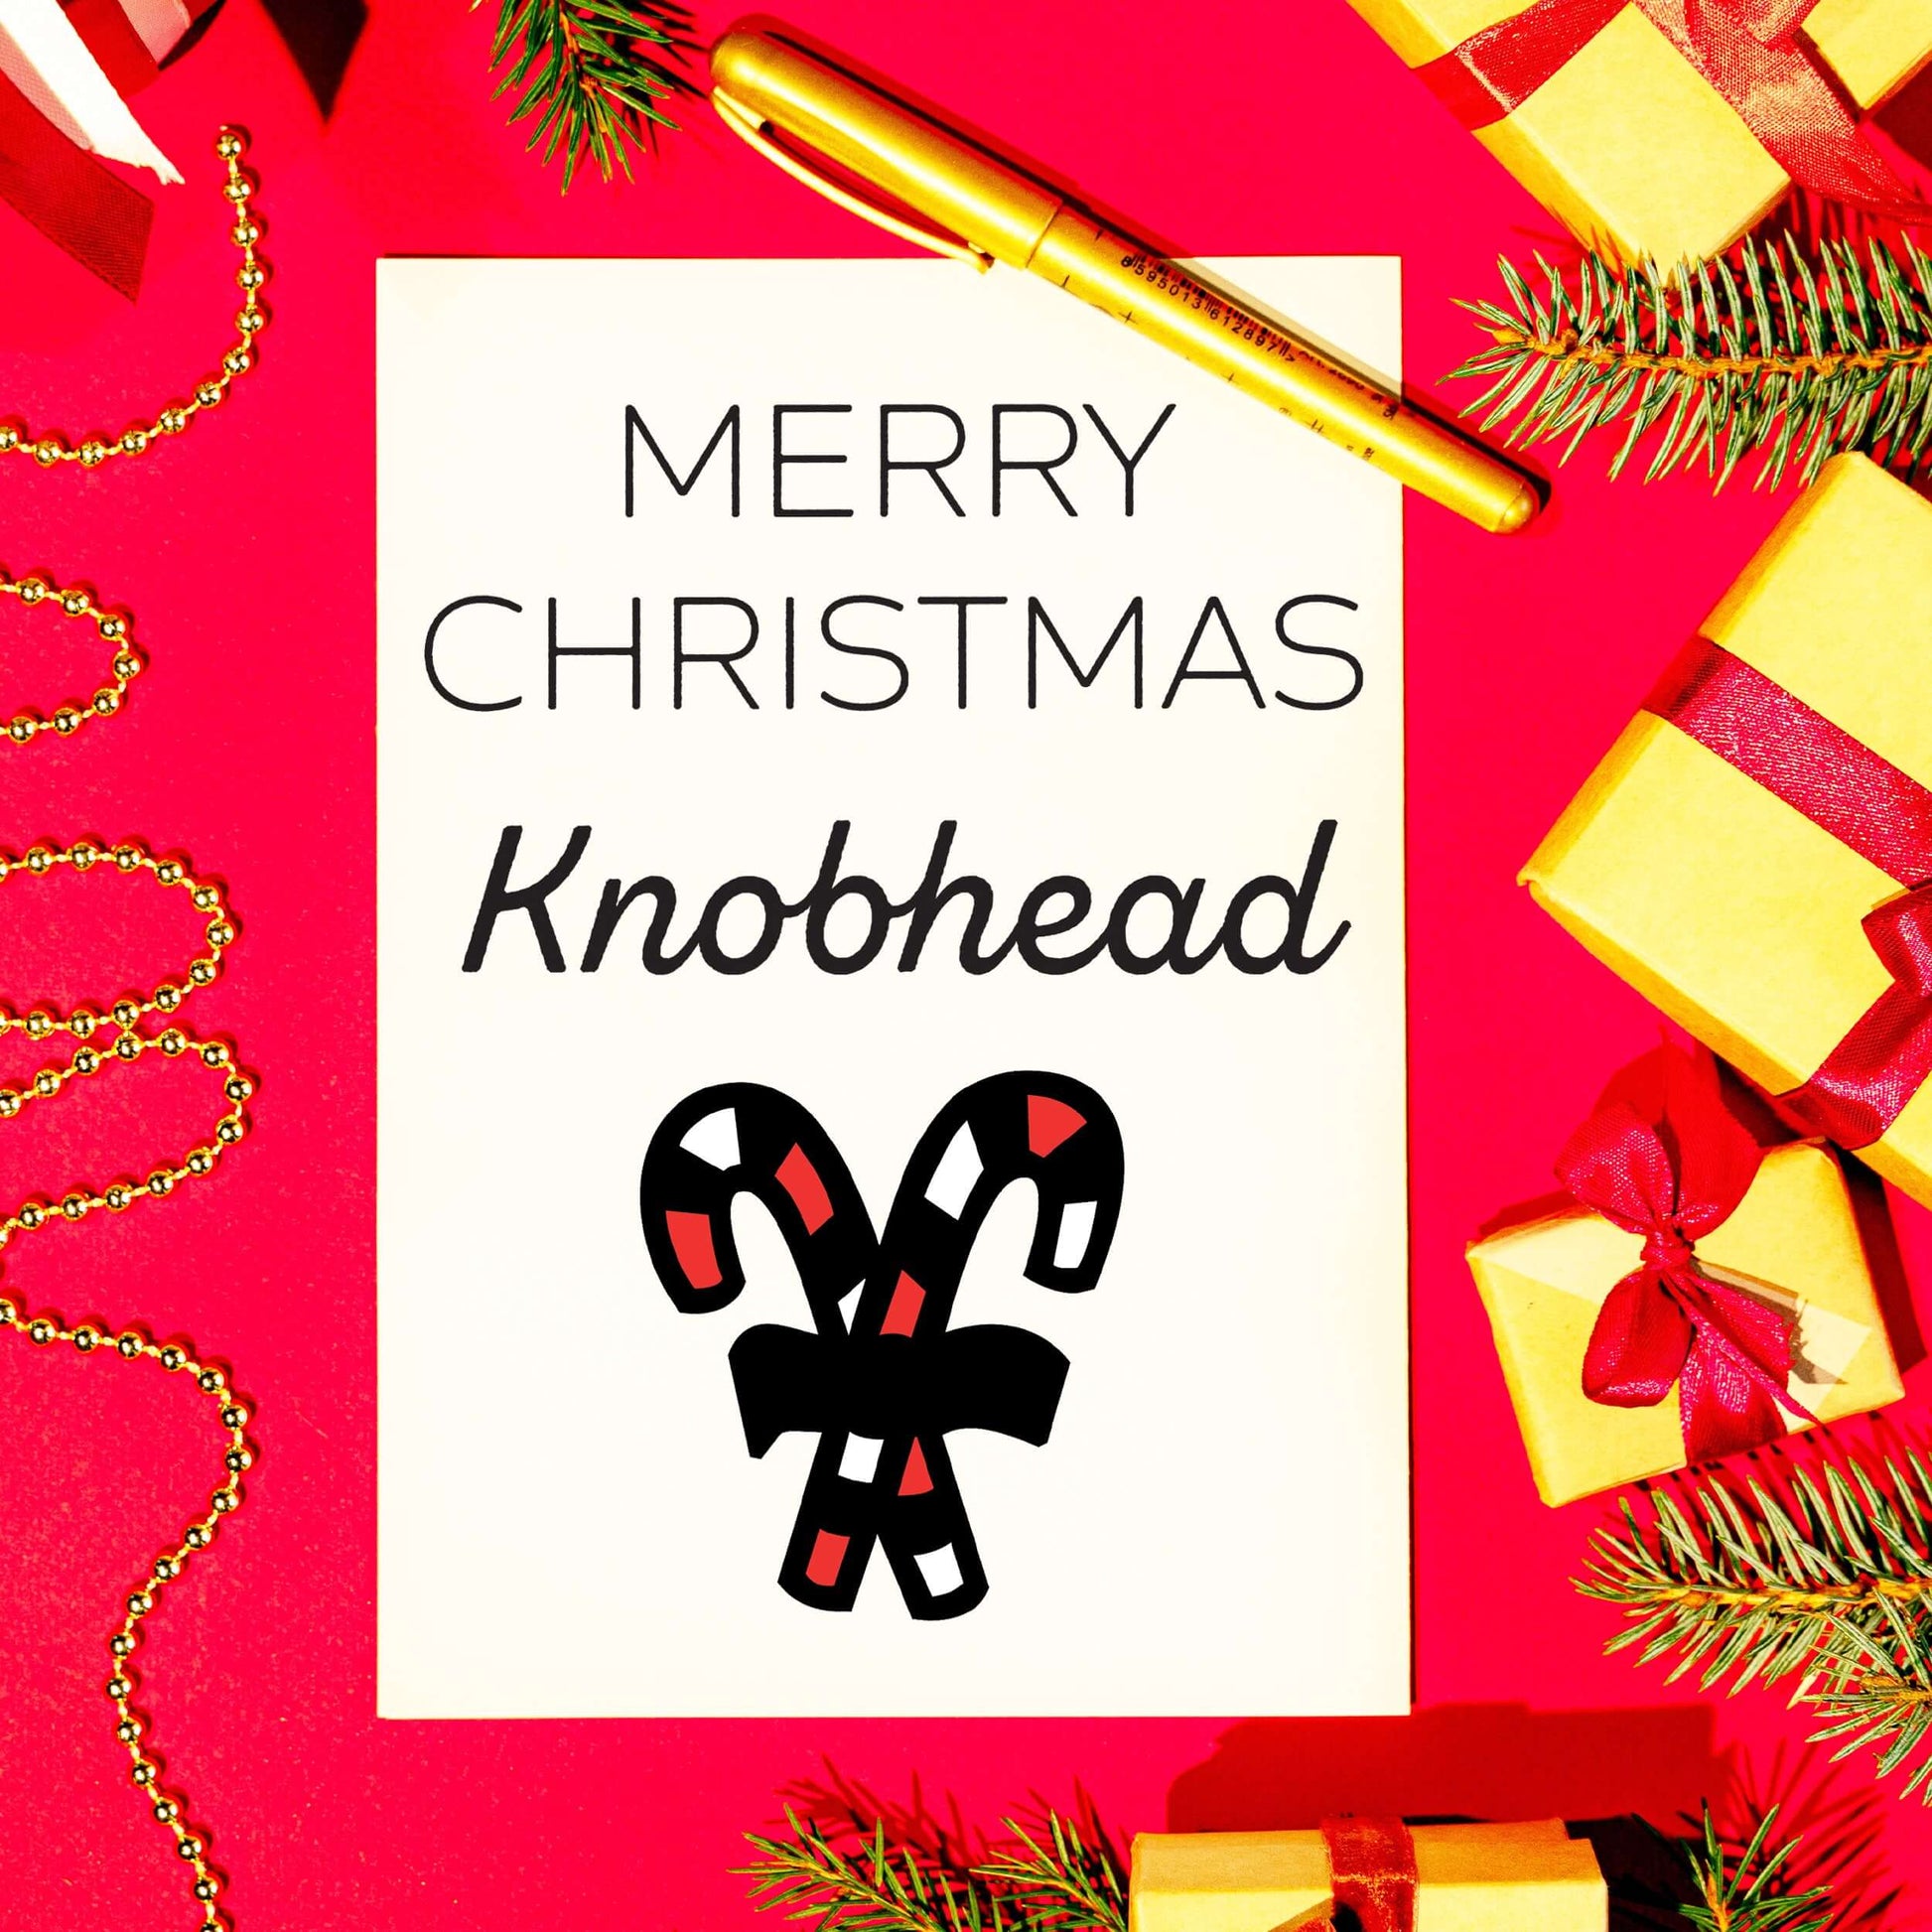 Little Kraken's Merry Christmas Knobhead Funny Candycane Christmas White A5 Greeting Card, Christmas Cards for £3.50 each